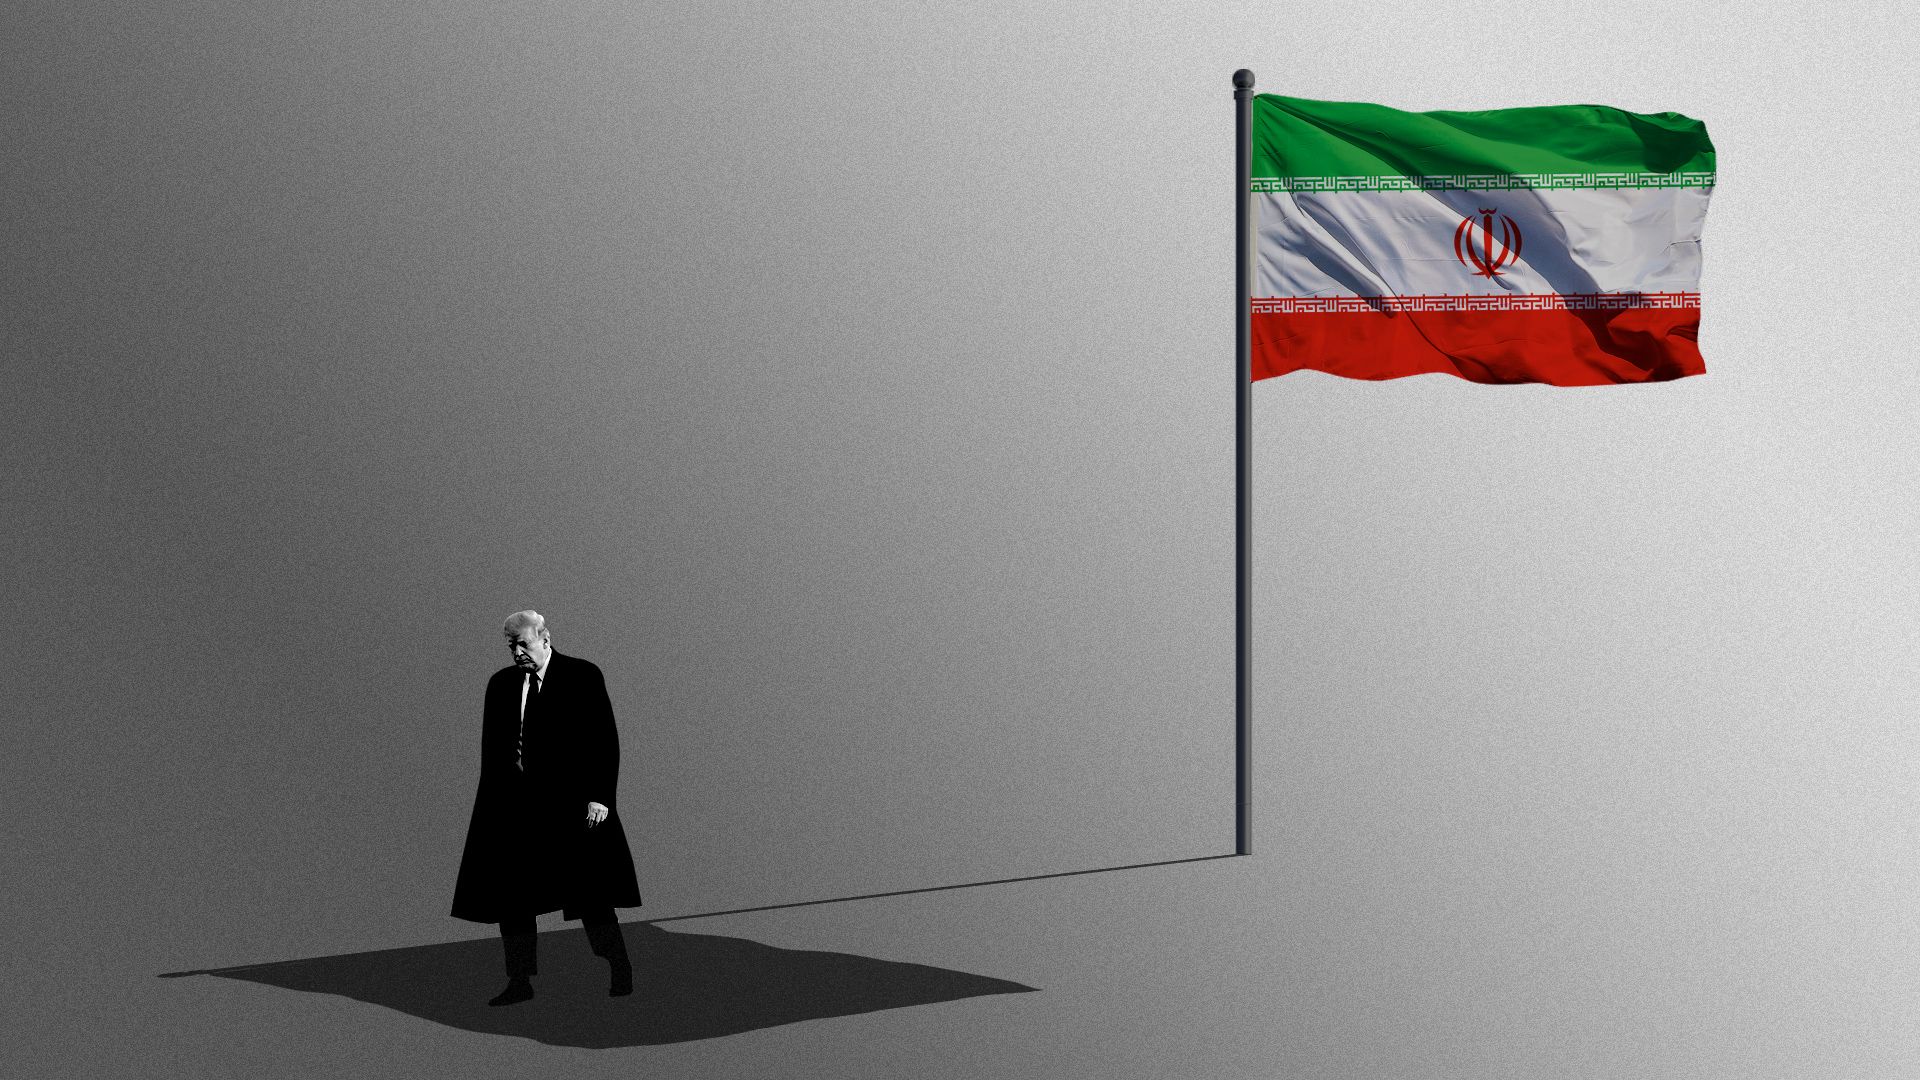 Illustration of President Trump in the shadow of the Iranian flag